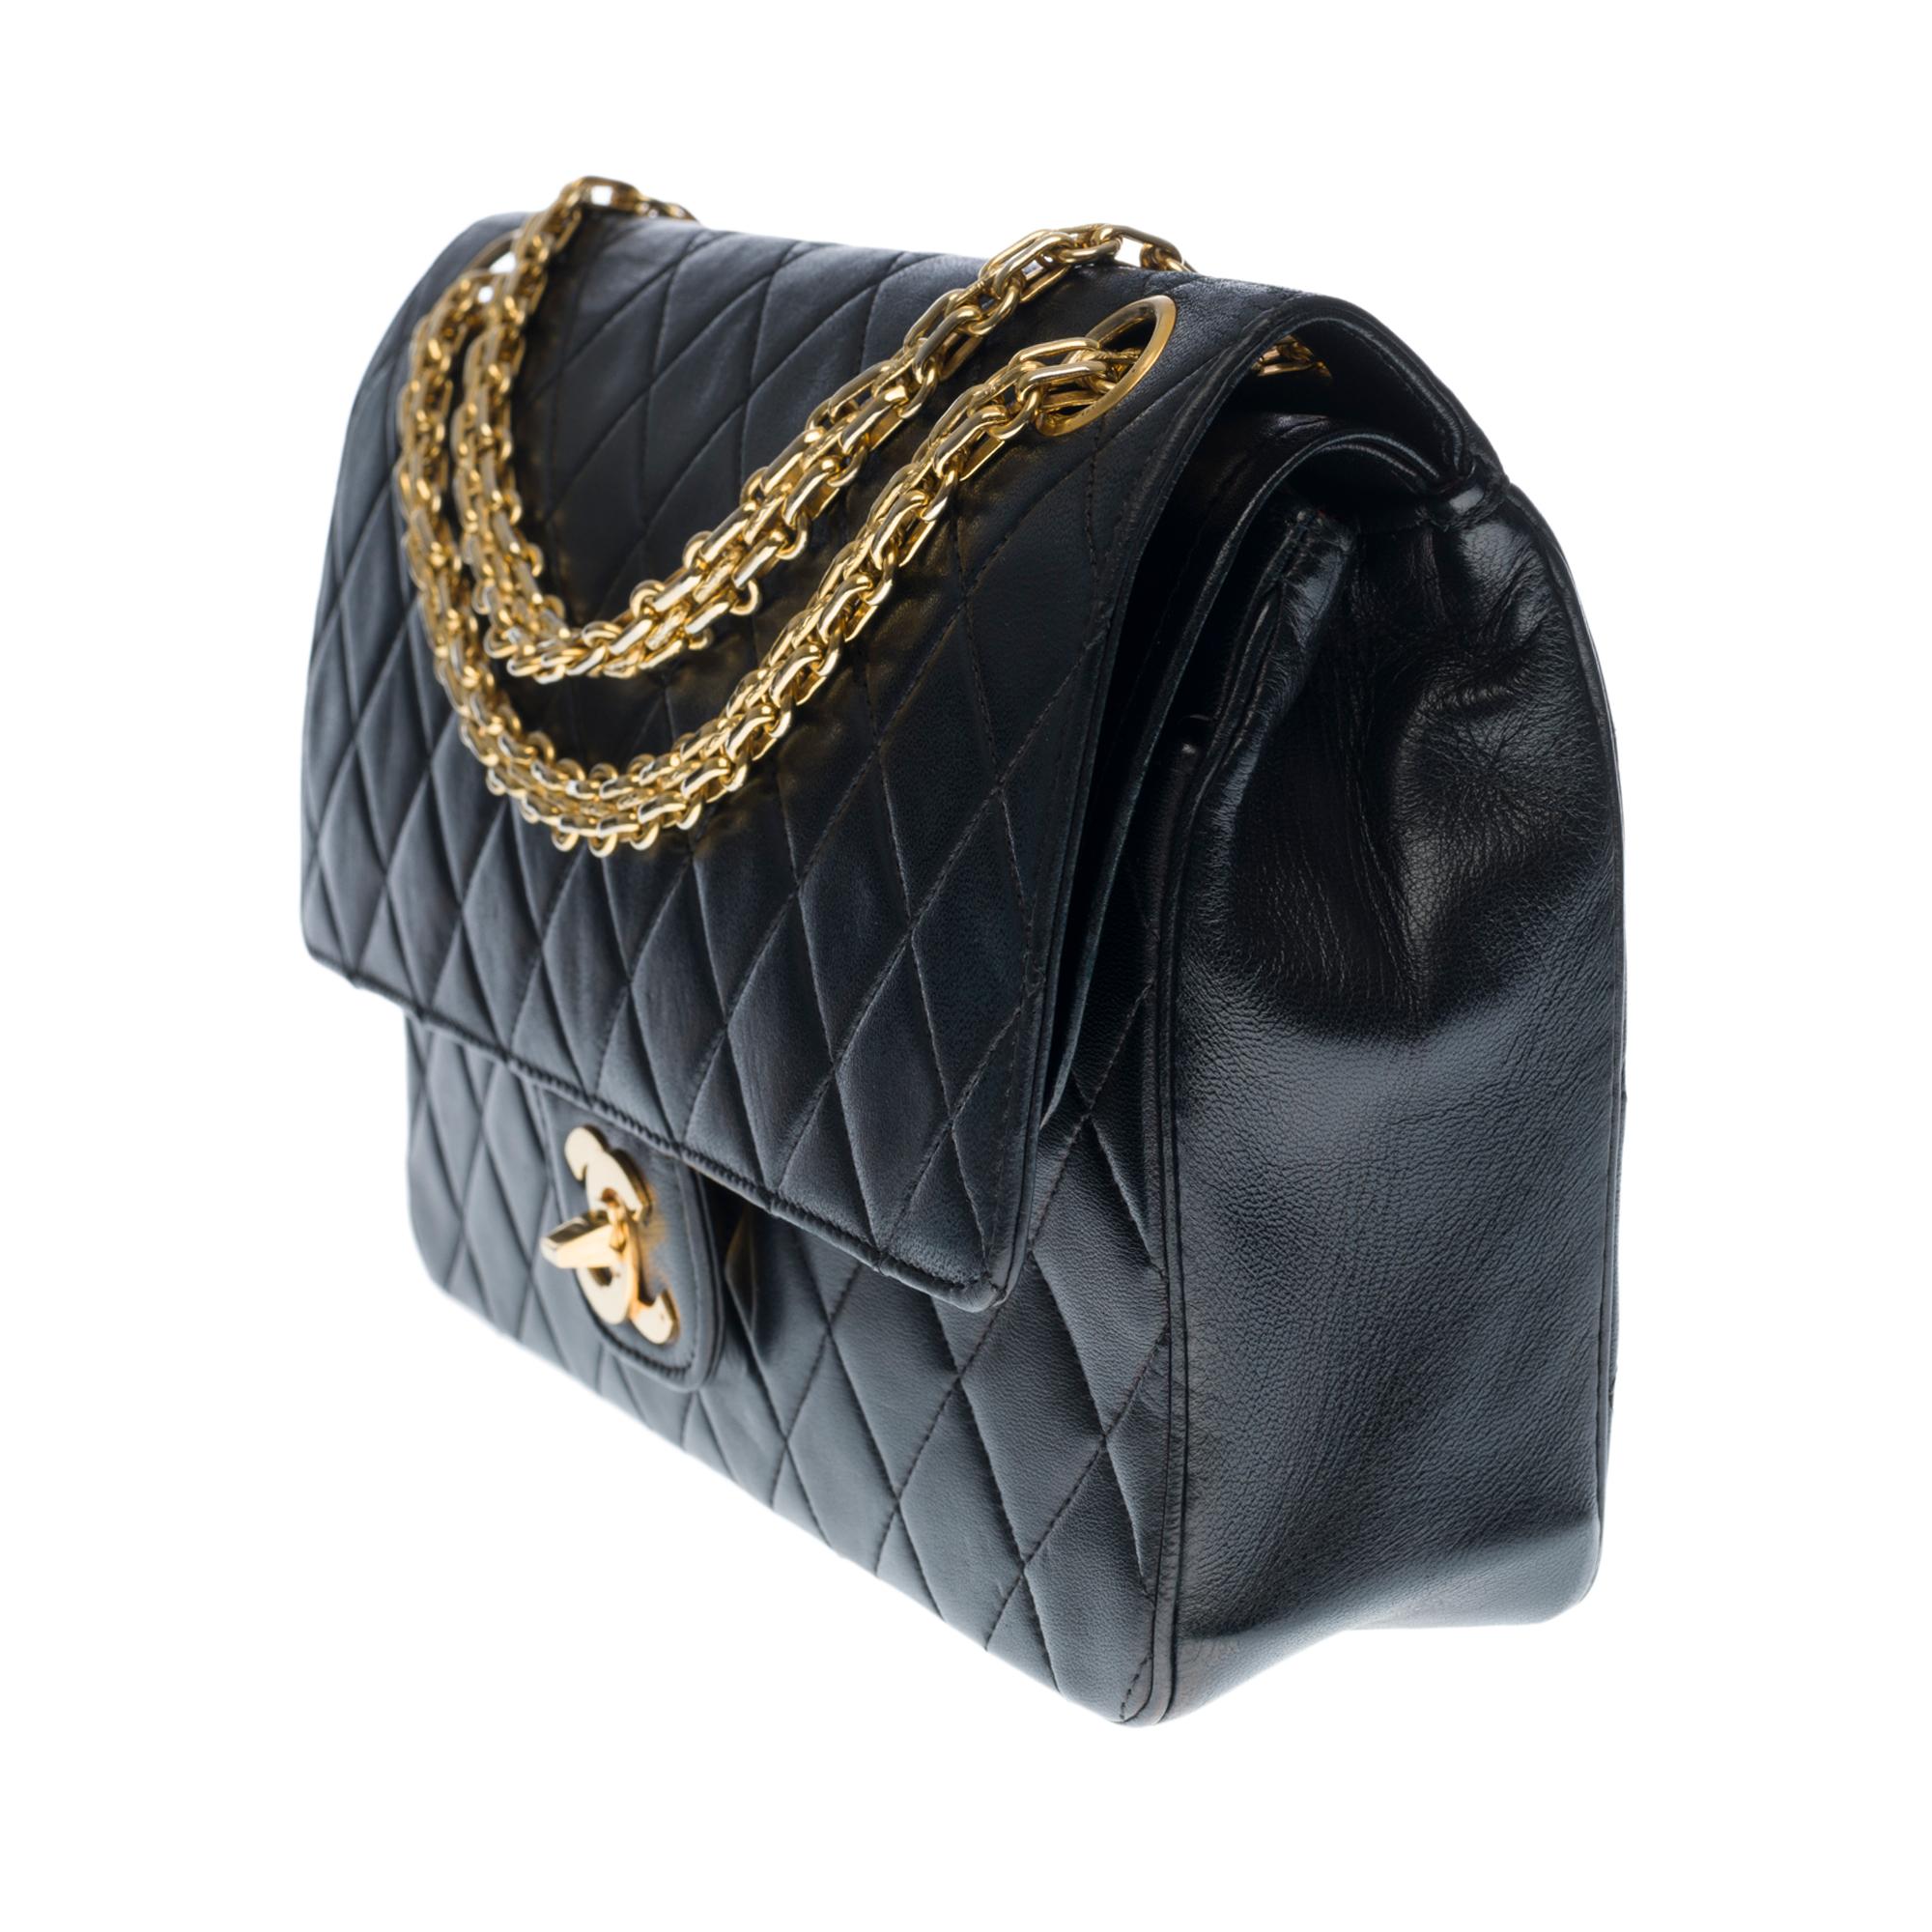 Beautiful Chanel Timeless/Classique handbag with double flap in black quilted lambskin leather, gold metal hardware, a Mademoiselle chain handle in gold metal allowing a hand or shoulder support

Closure with gold metal flap
A patch pocket on the